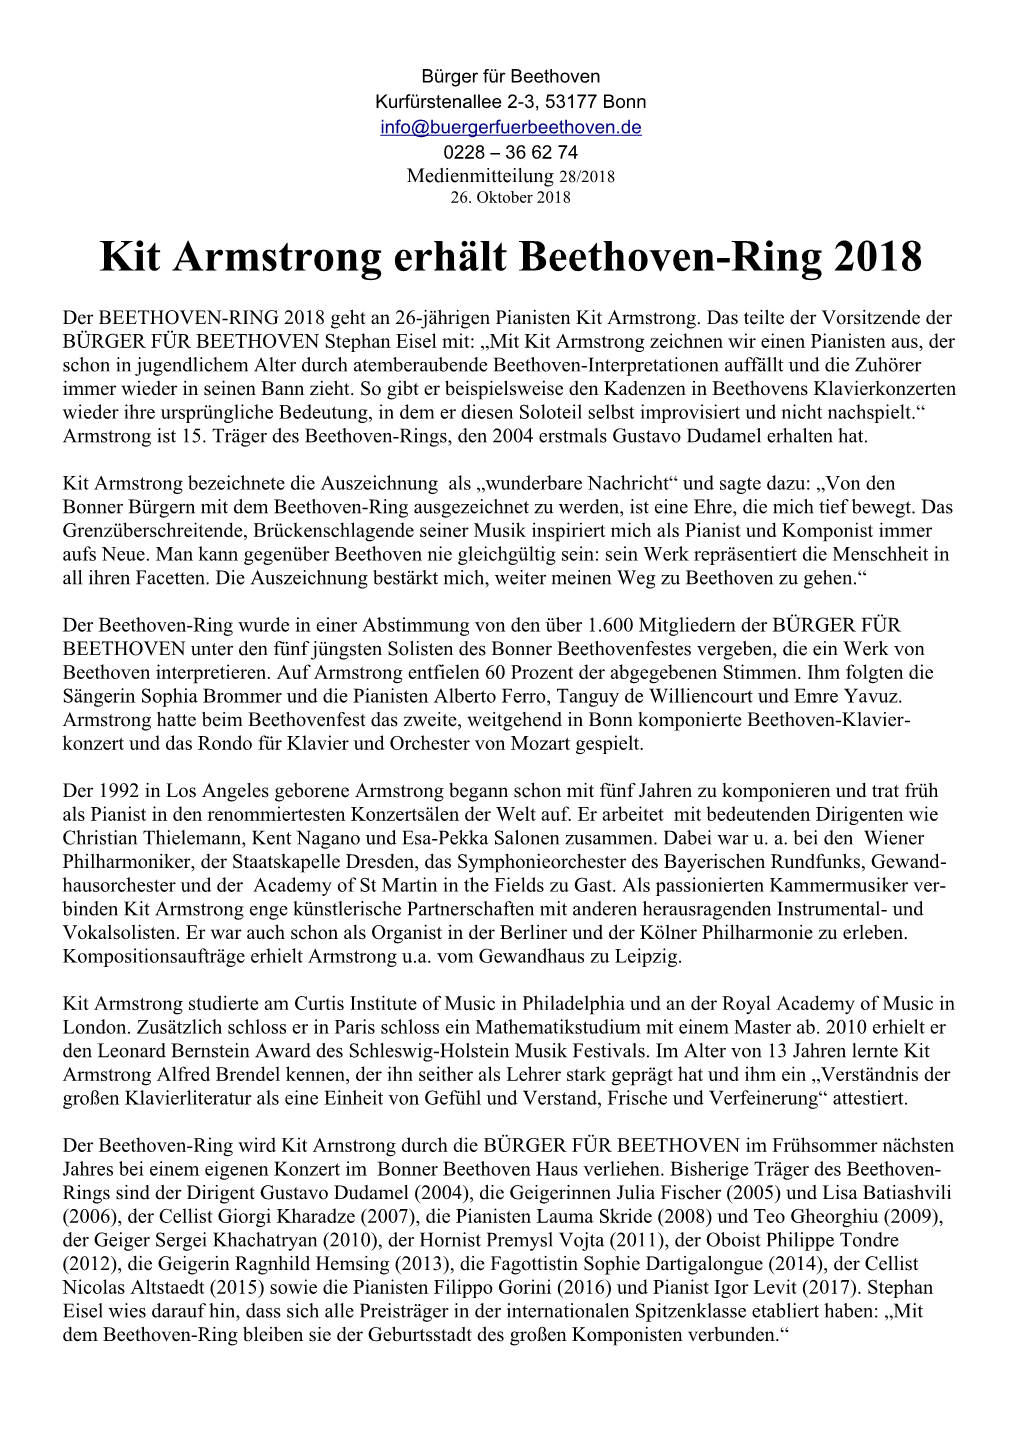 Kit Armstrong Erhält Beethoven-Ring 2018